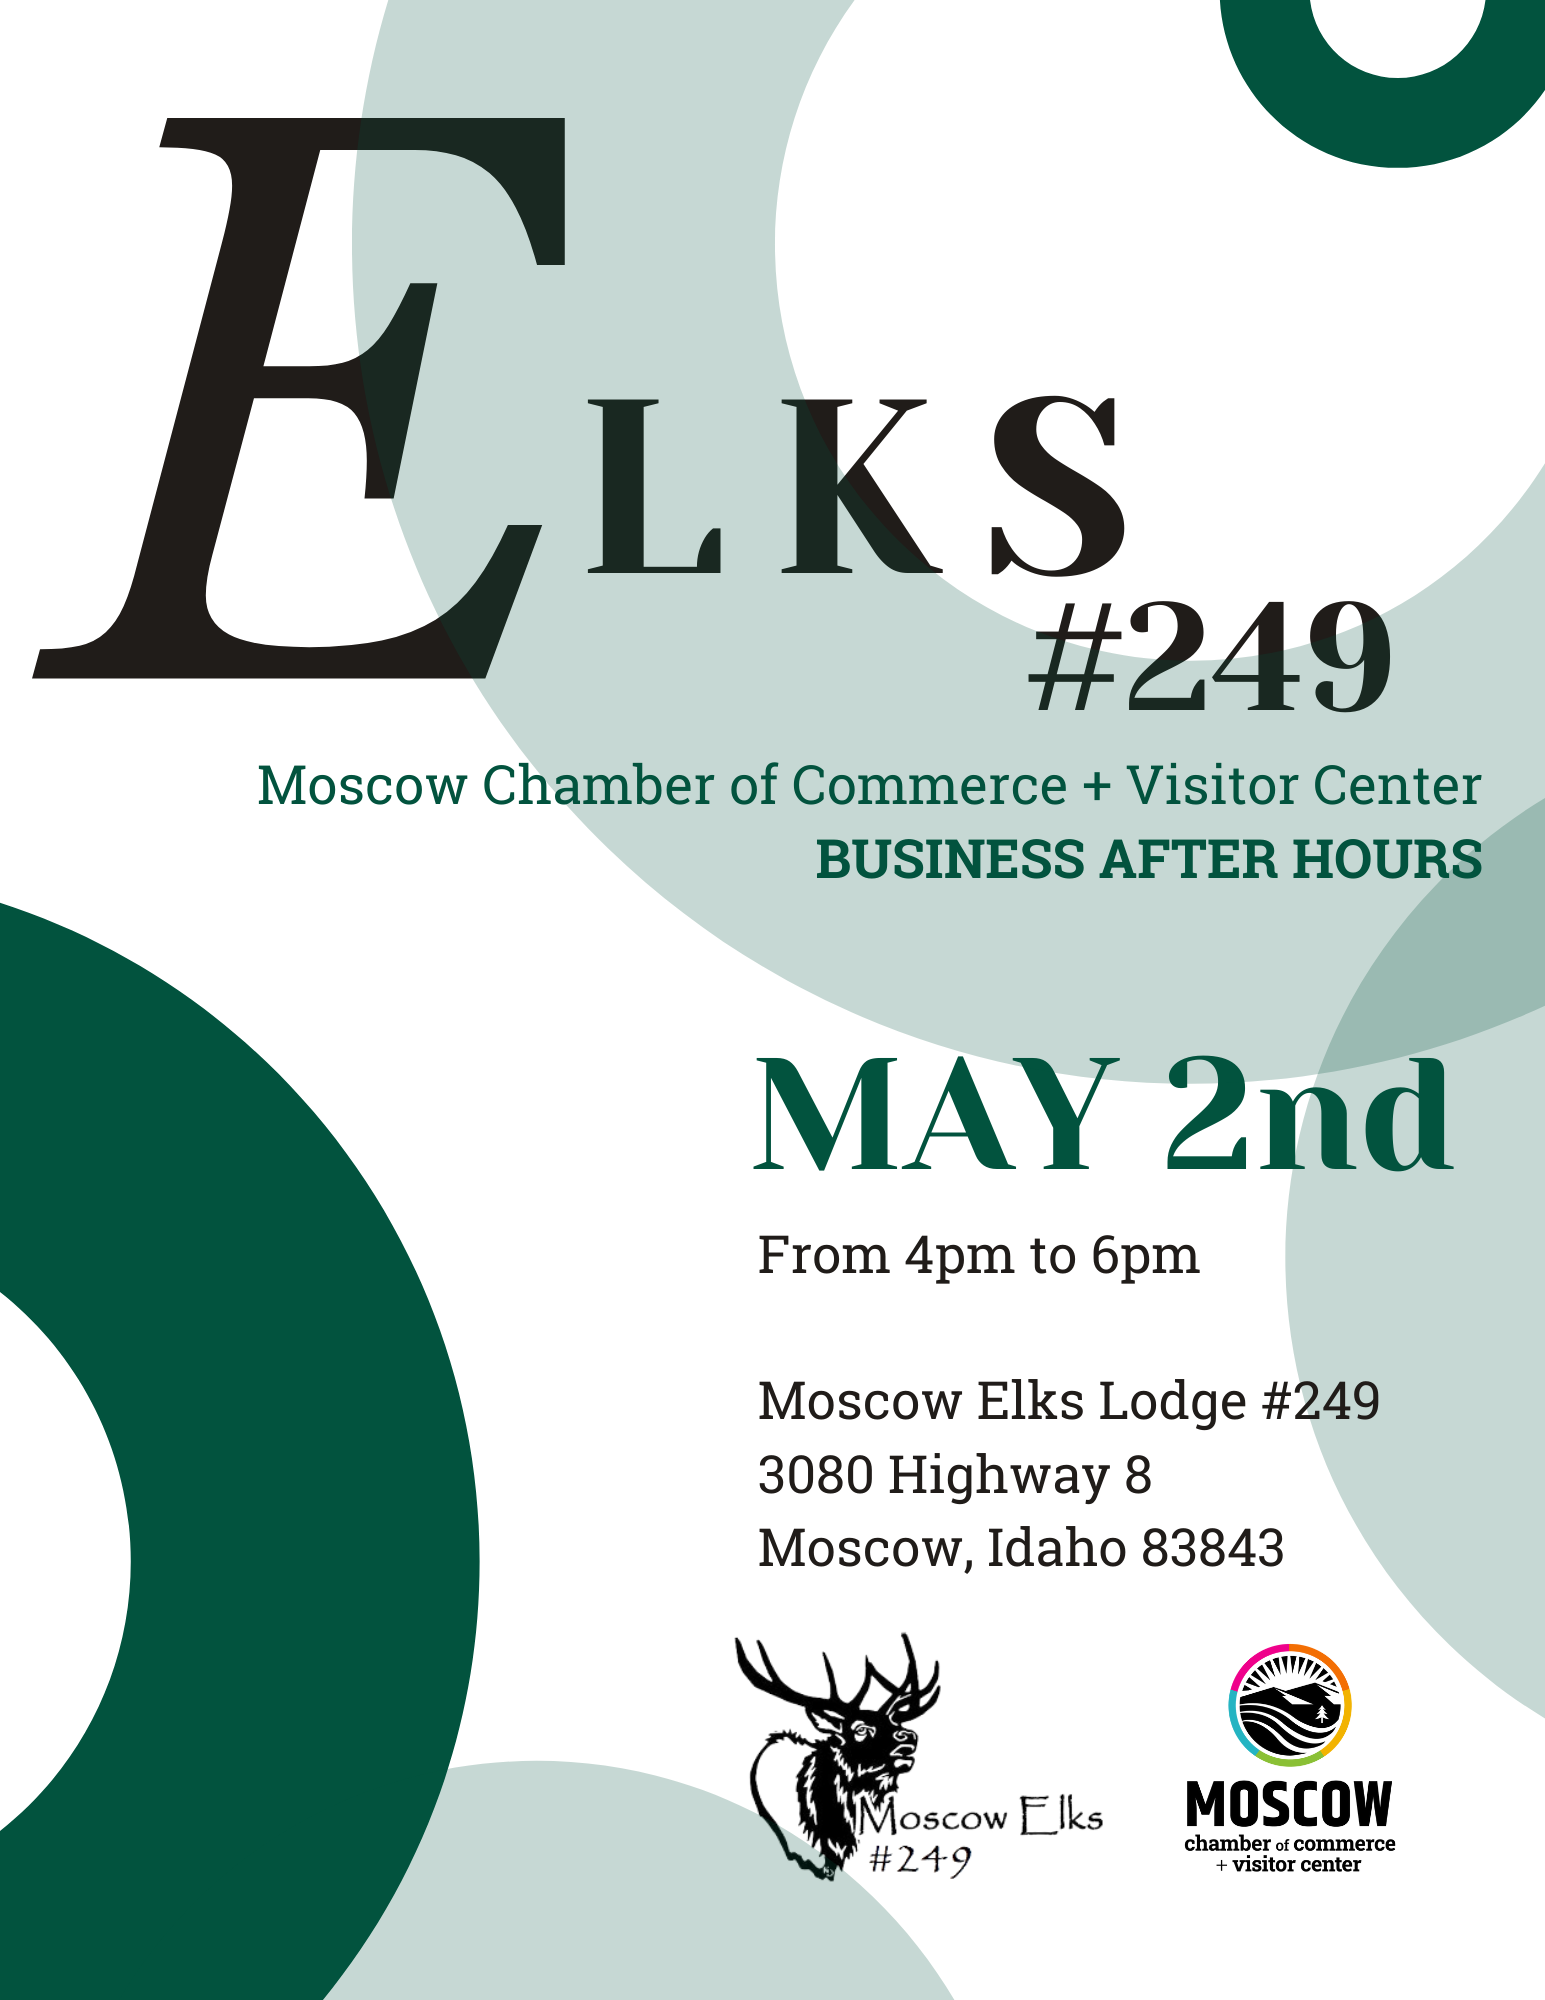 Moscow Elks #249 Business After Hours